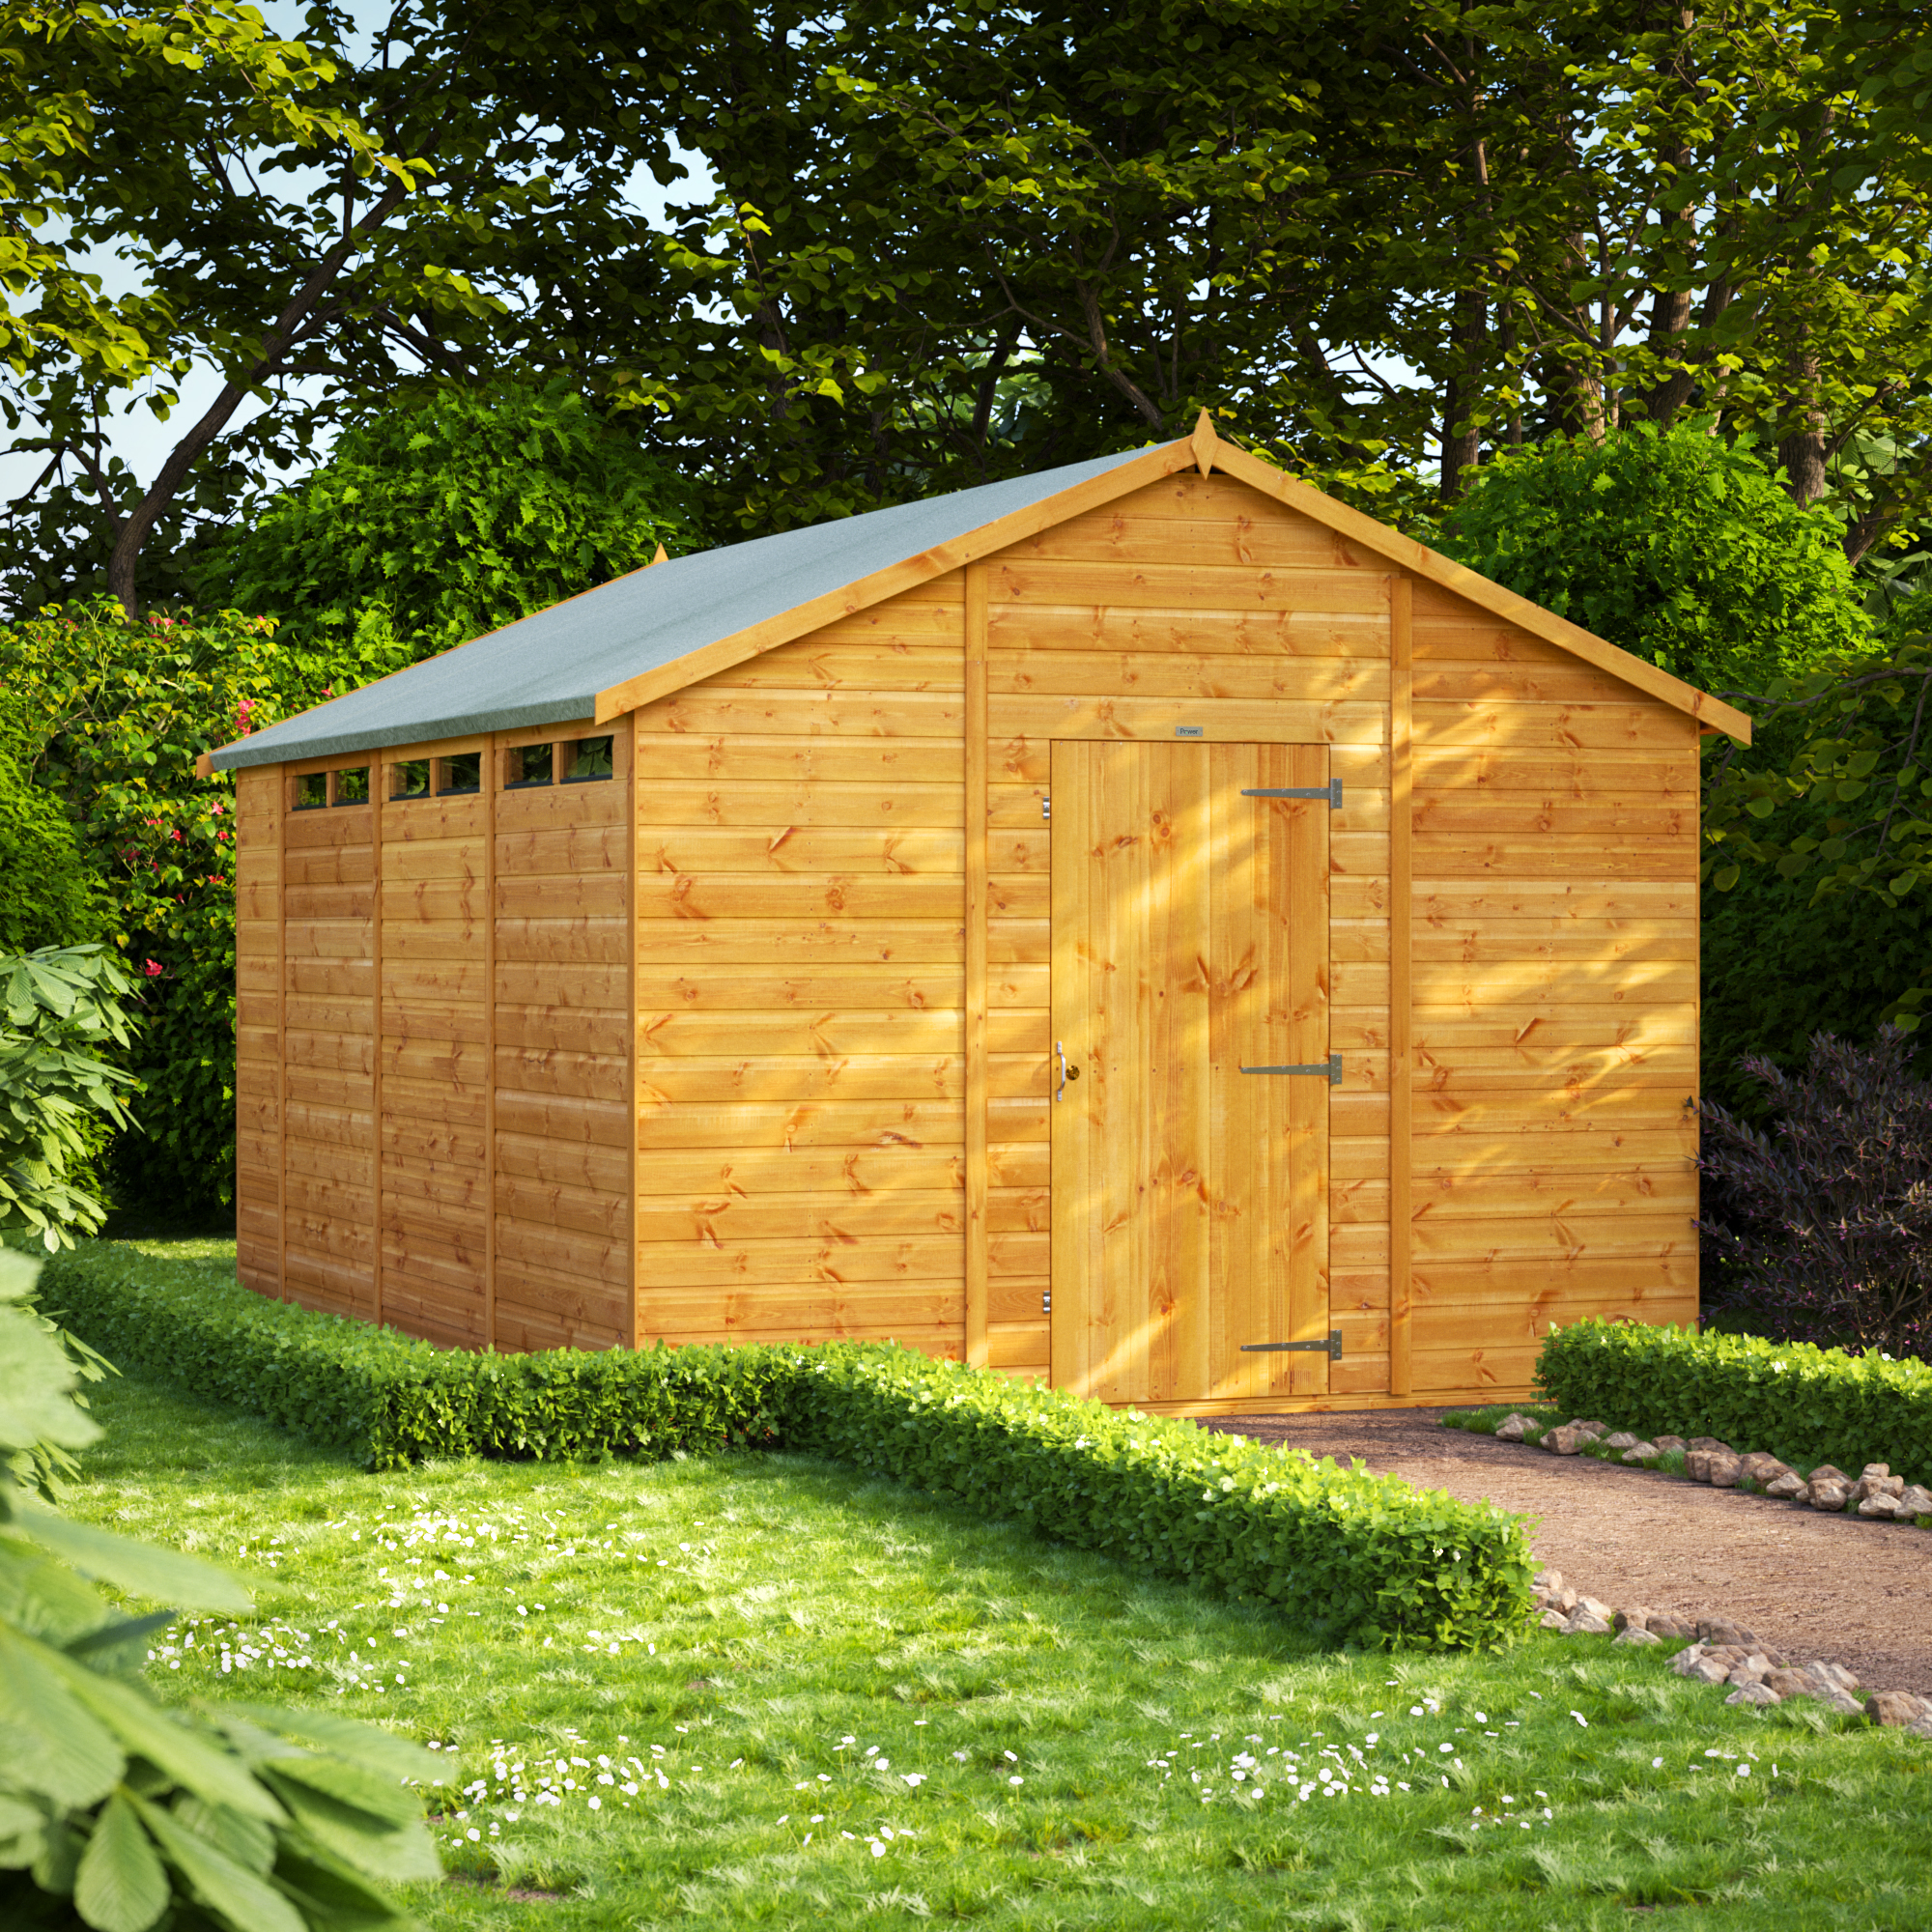 Power Sheds Apex Shiplap Dip Treated Security Shed - 14 x 10ft